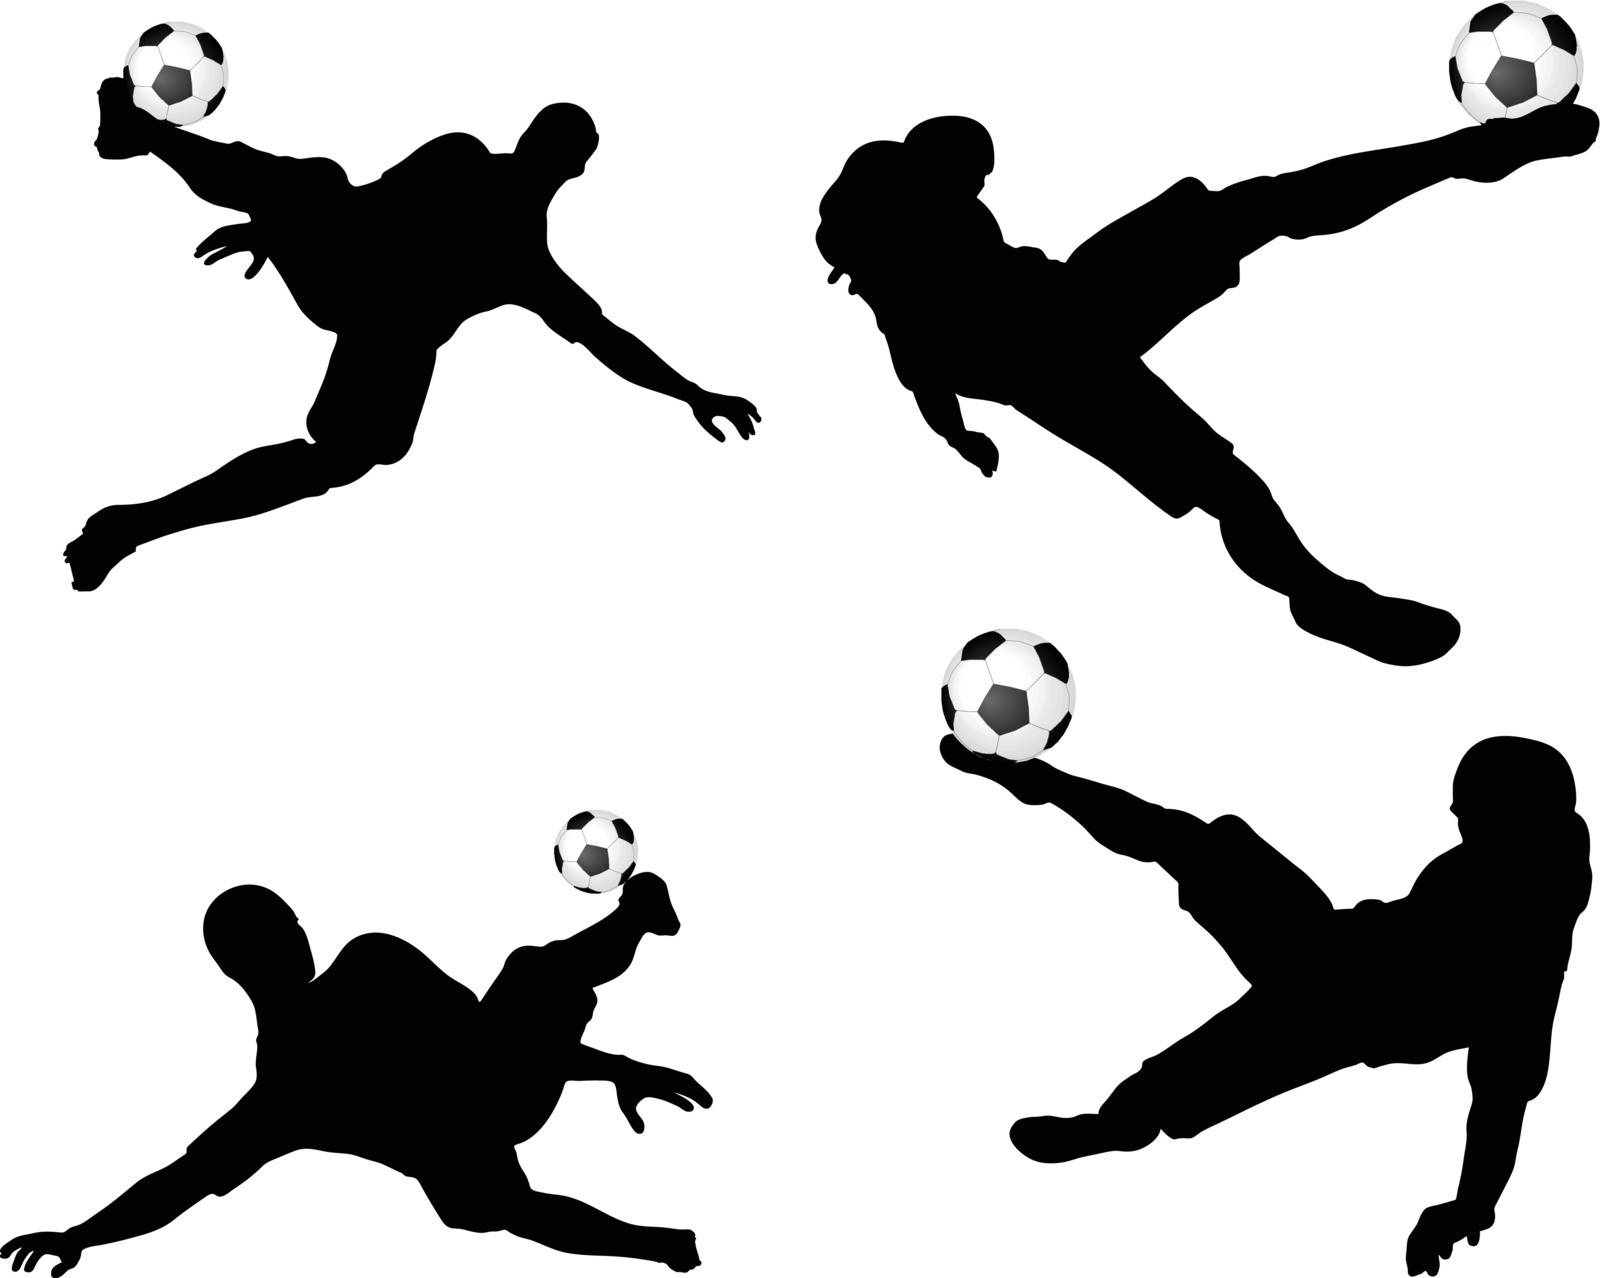 poses of soccer players silhouettes in air position by Istanbul2009